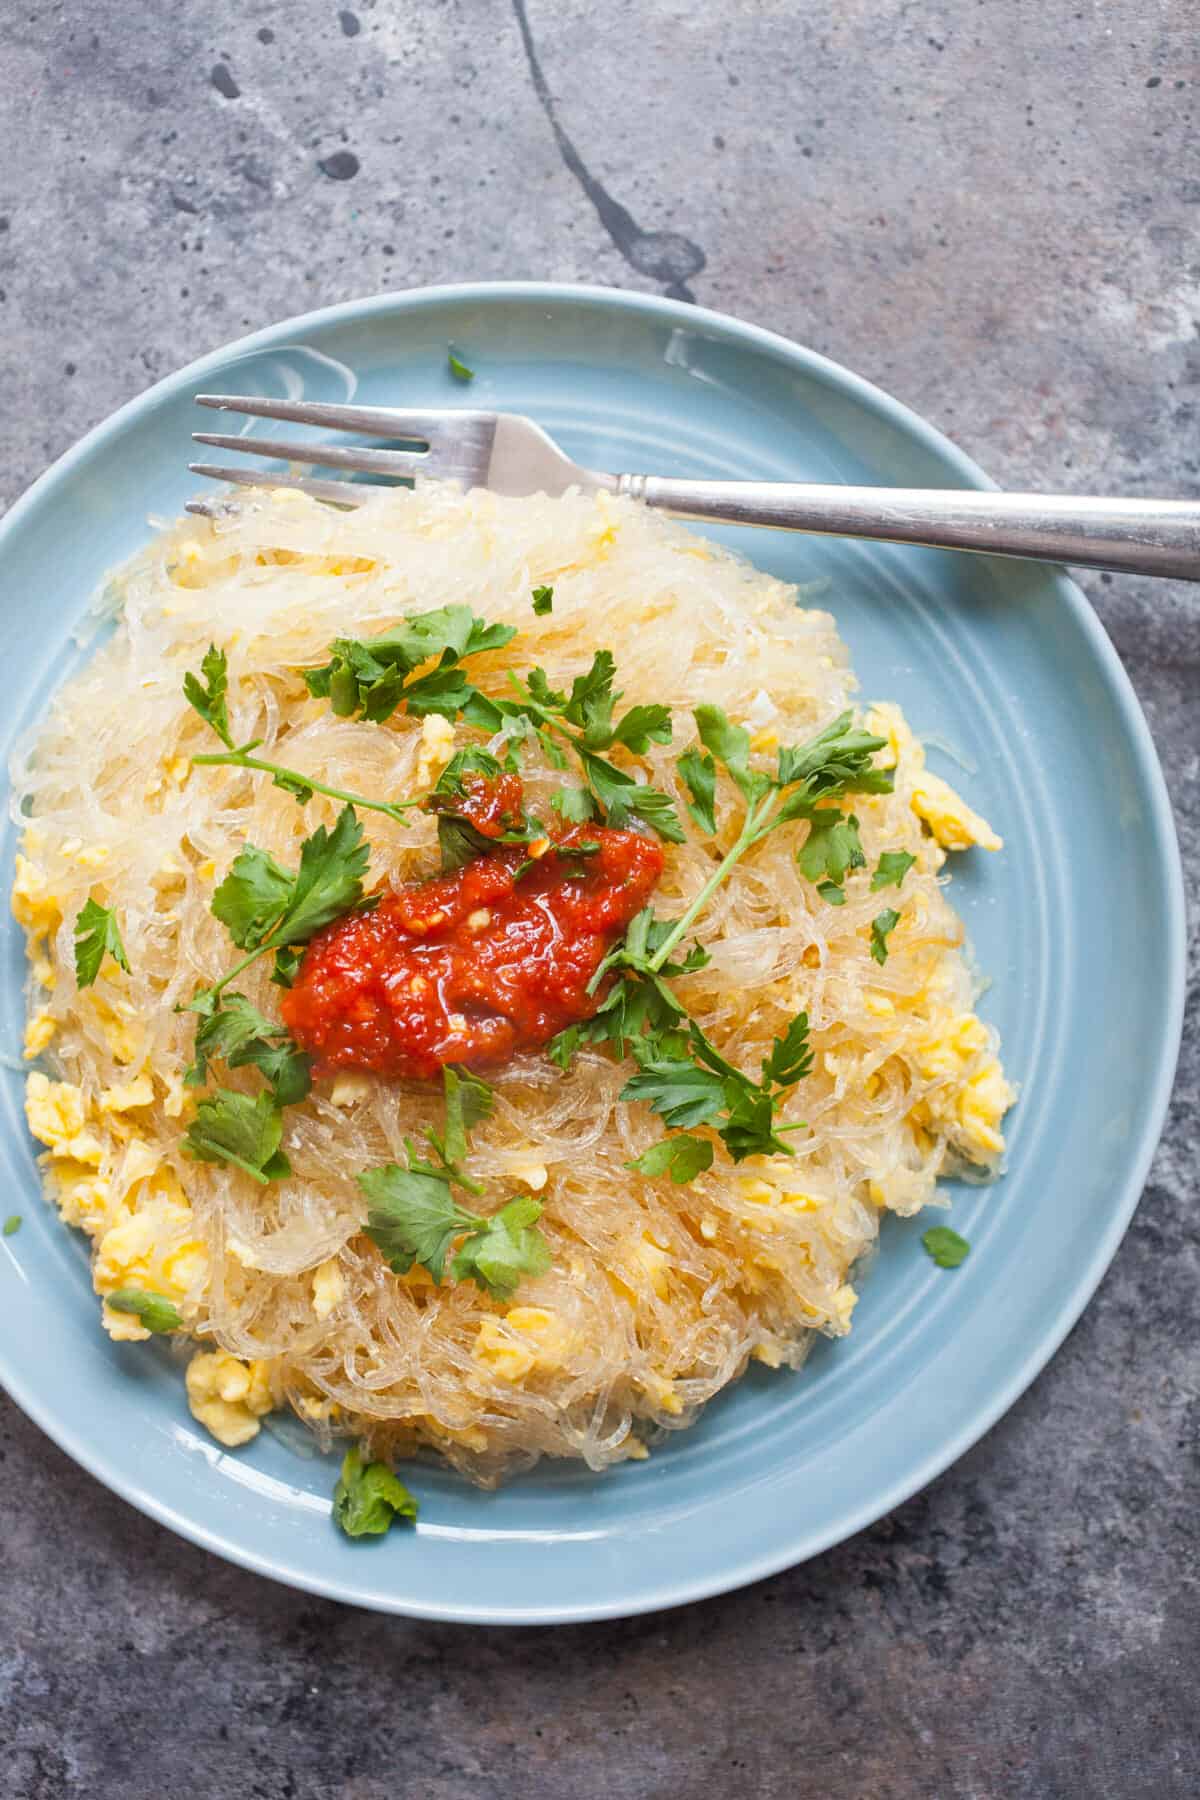 Glass Noodles stir-fried with eggs with parsley and chili sauce.